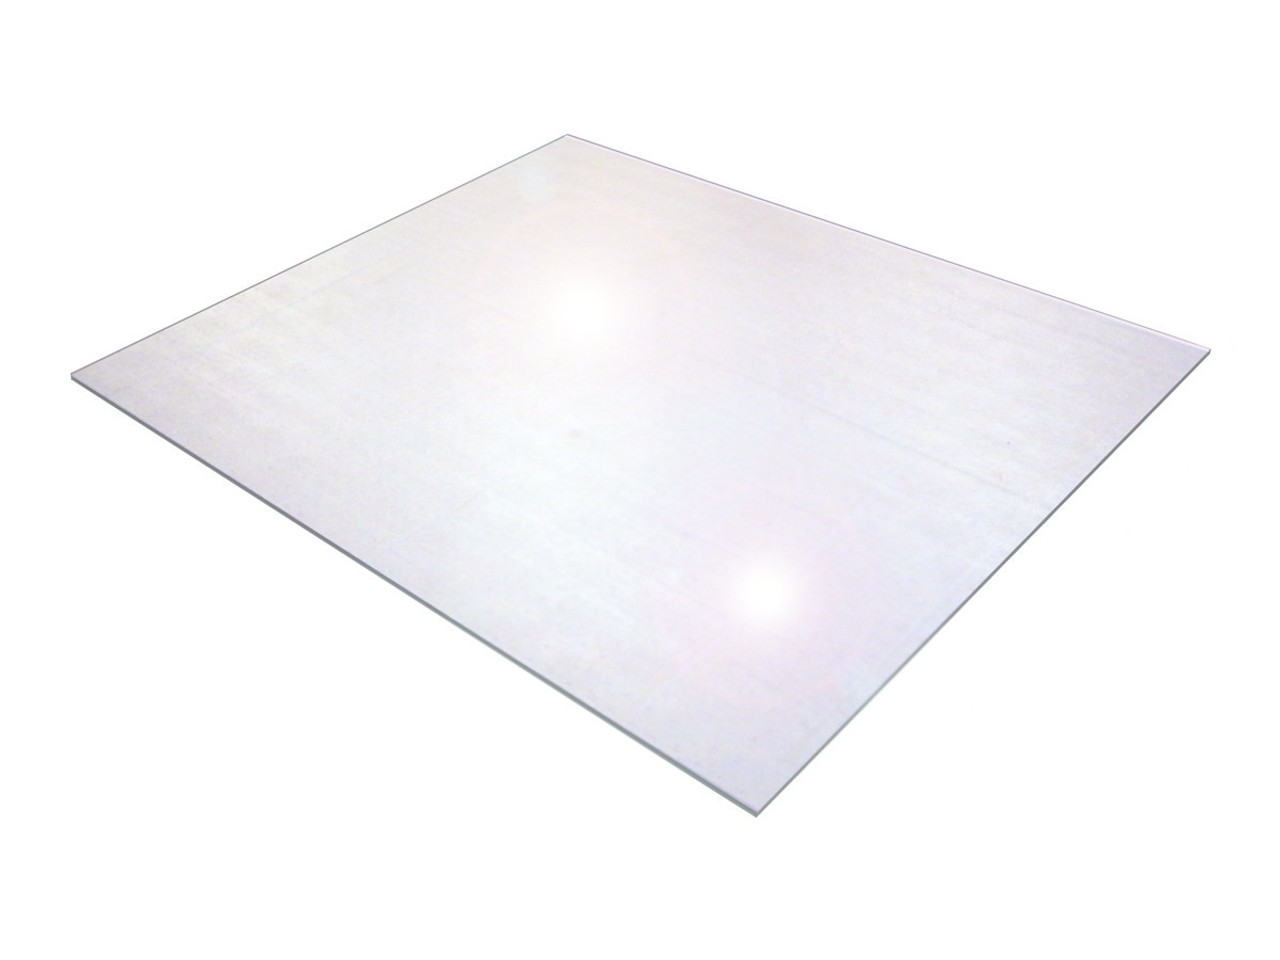 https://cdn11.bigcommerce.com/s-fjwps1jbkv/images/stencil/1280x1280/products/237/3305/cleartex-ultimat-xxl-general-purpose-office-mat-for-hard-floors-or-strong-polycarbonate-or-rectangular-floor-protector-or-multiple-sizes__70189.1688990445.jpg?c=2